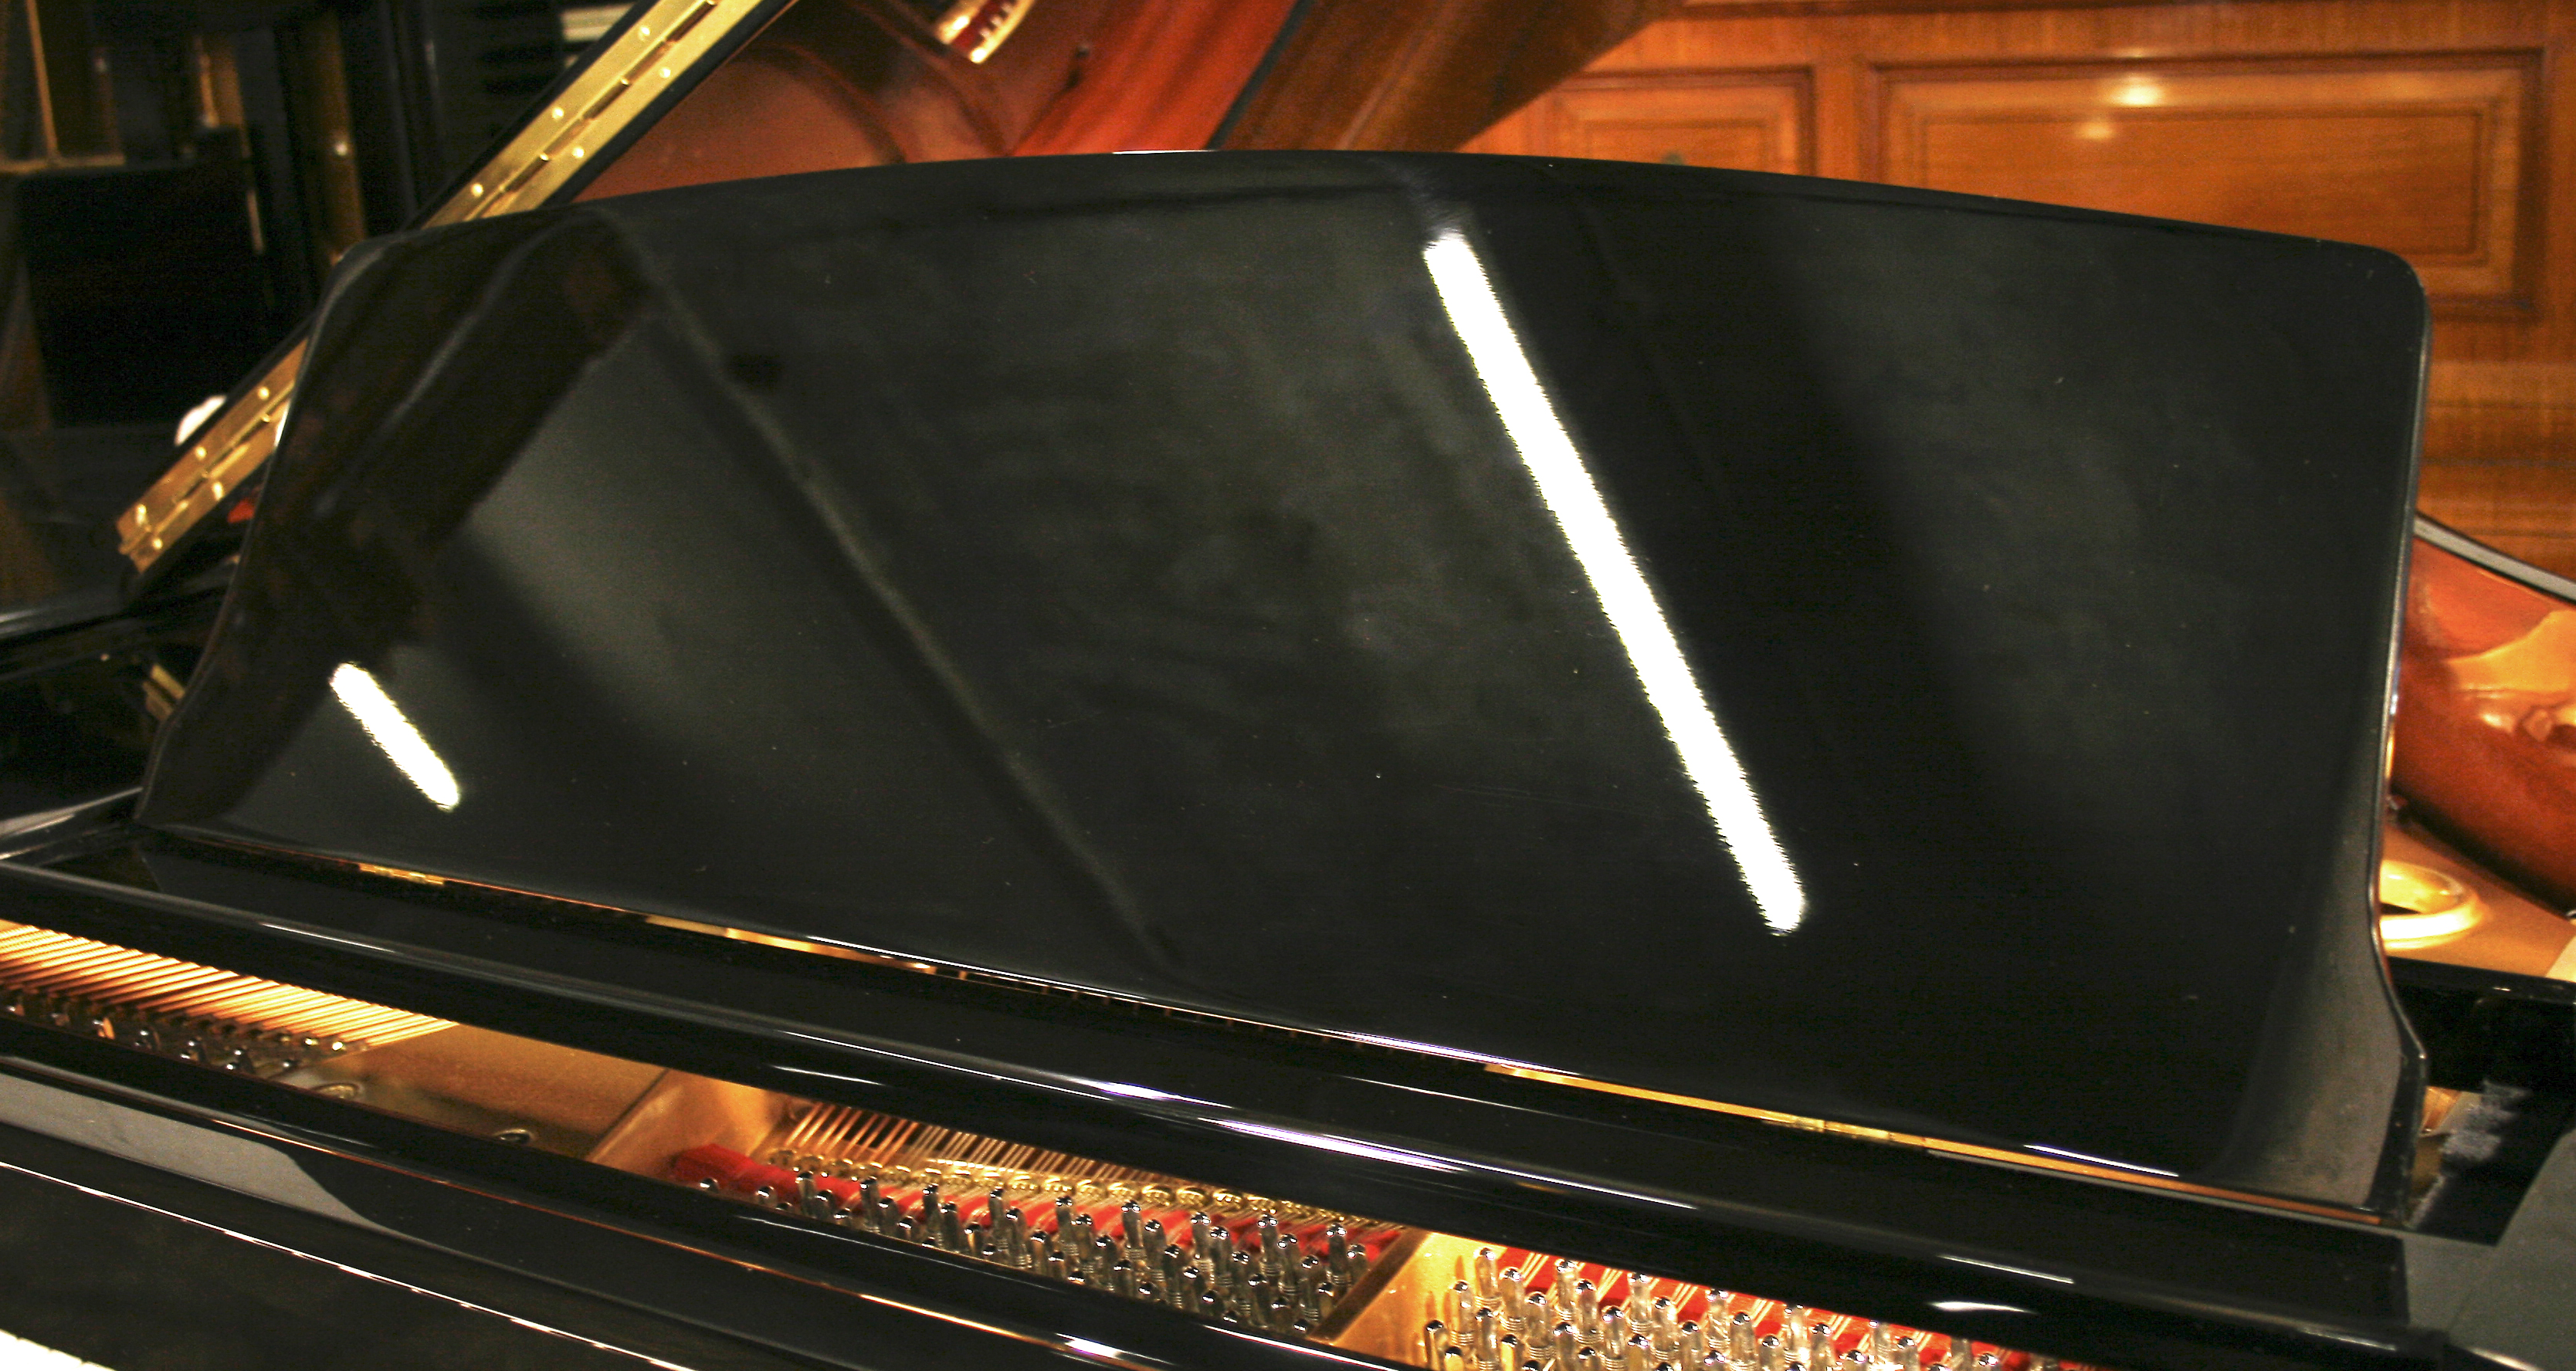 Steinhoven  Model 148  Grand Piano for sale. We are looking for Steinway pianos any age or condition.